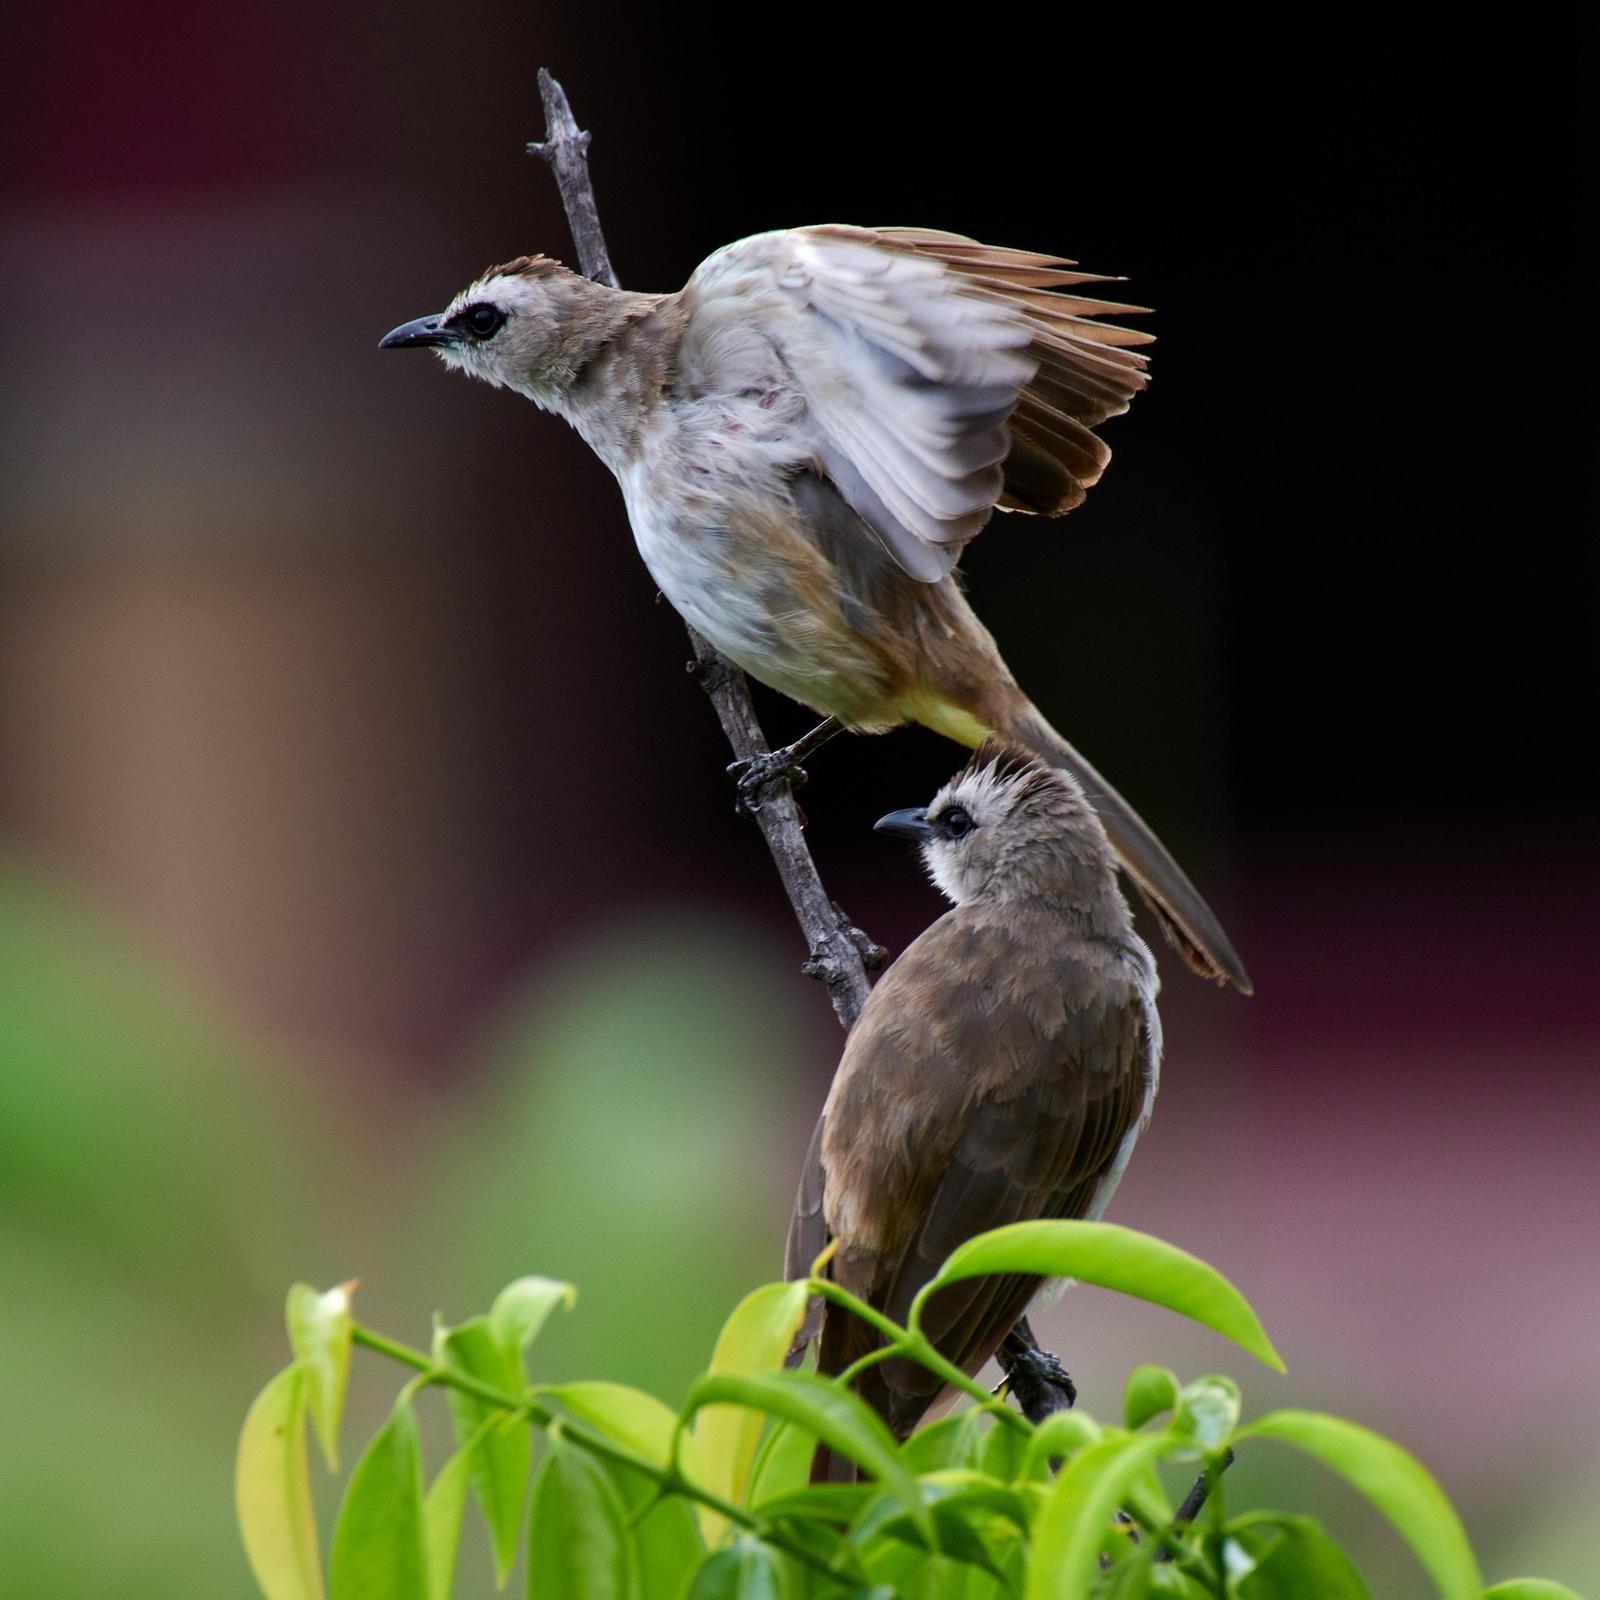 Yellow-vented Bulbul Photo by Mohammed Ambah